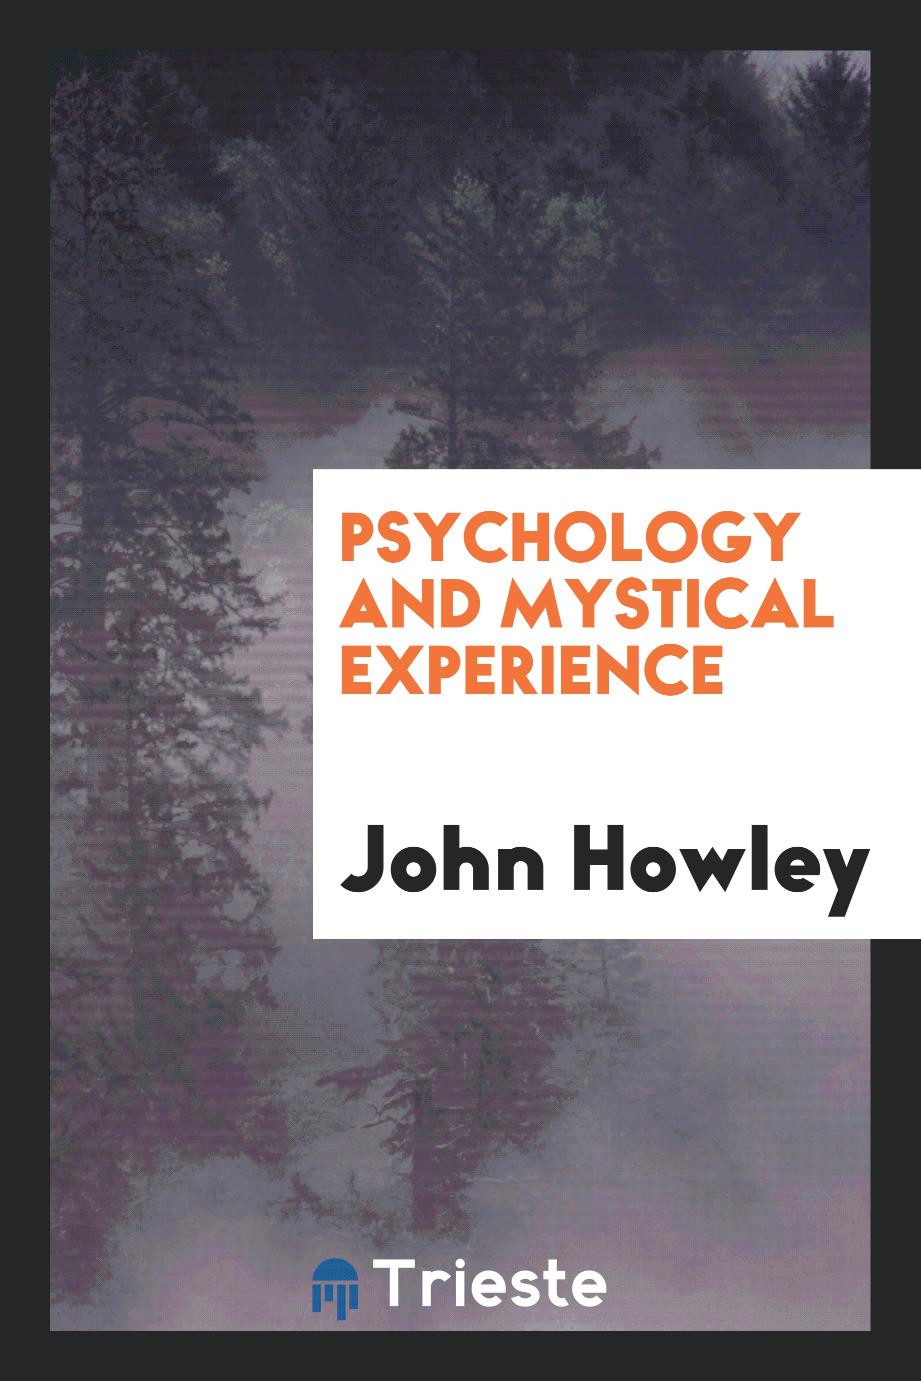 Psychology and mystical experience